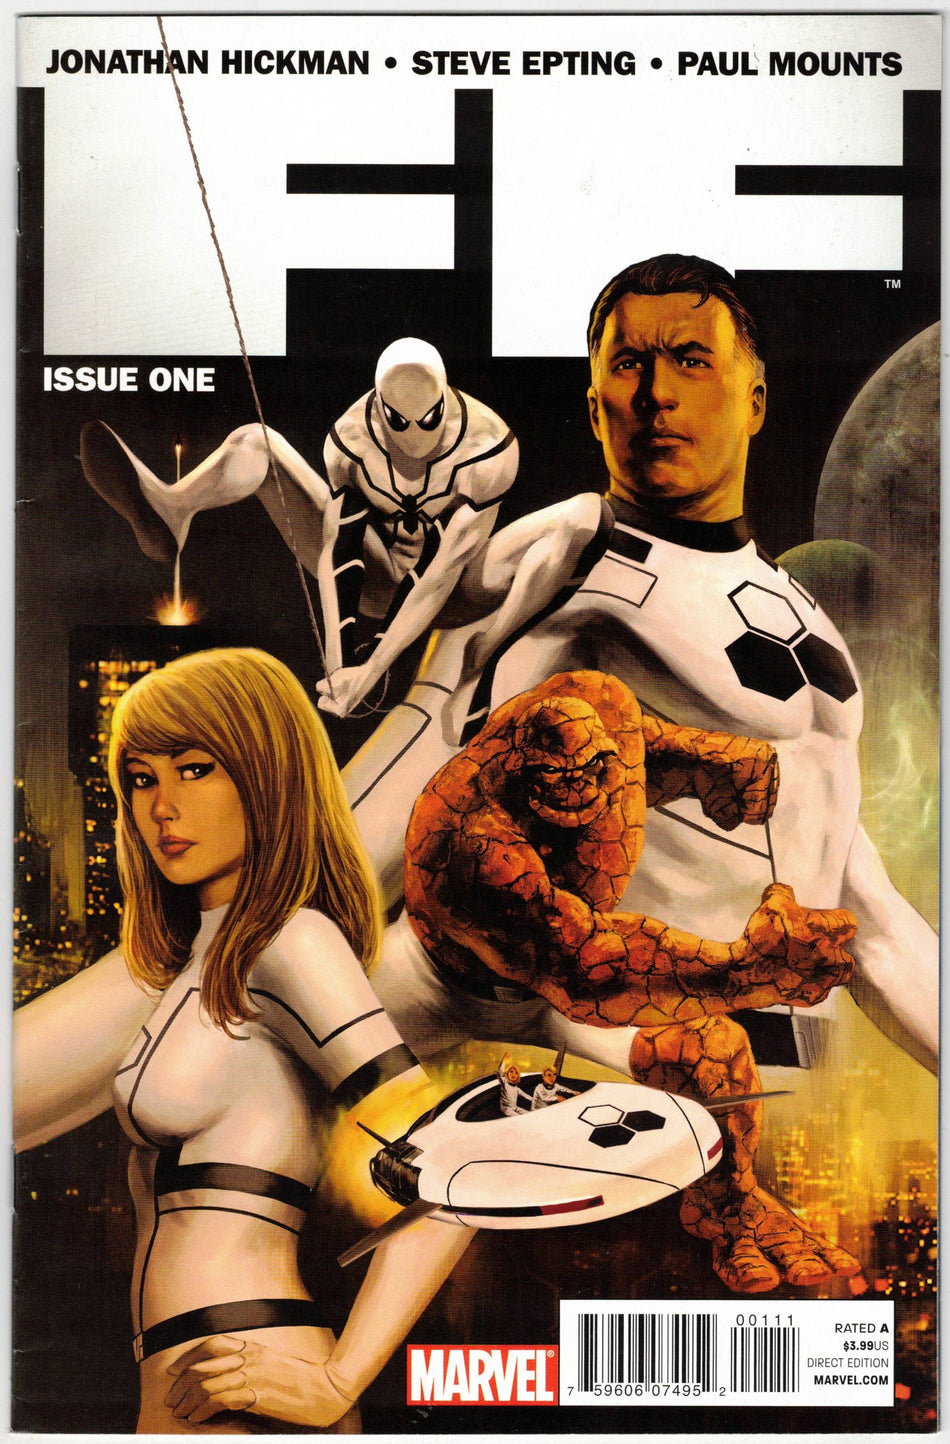 Photo of FF, Vol. 1 (2011)  Issue 1A Very Fine/Near Mint Comic sold by Stronghold Collectibles